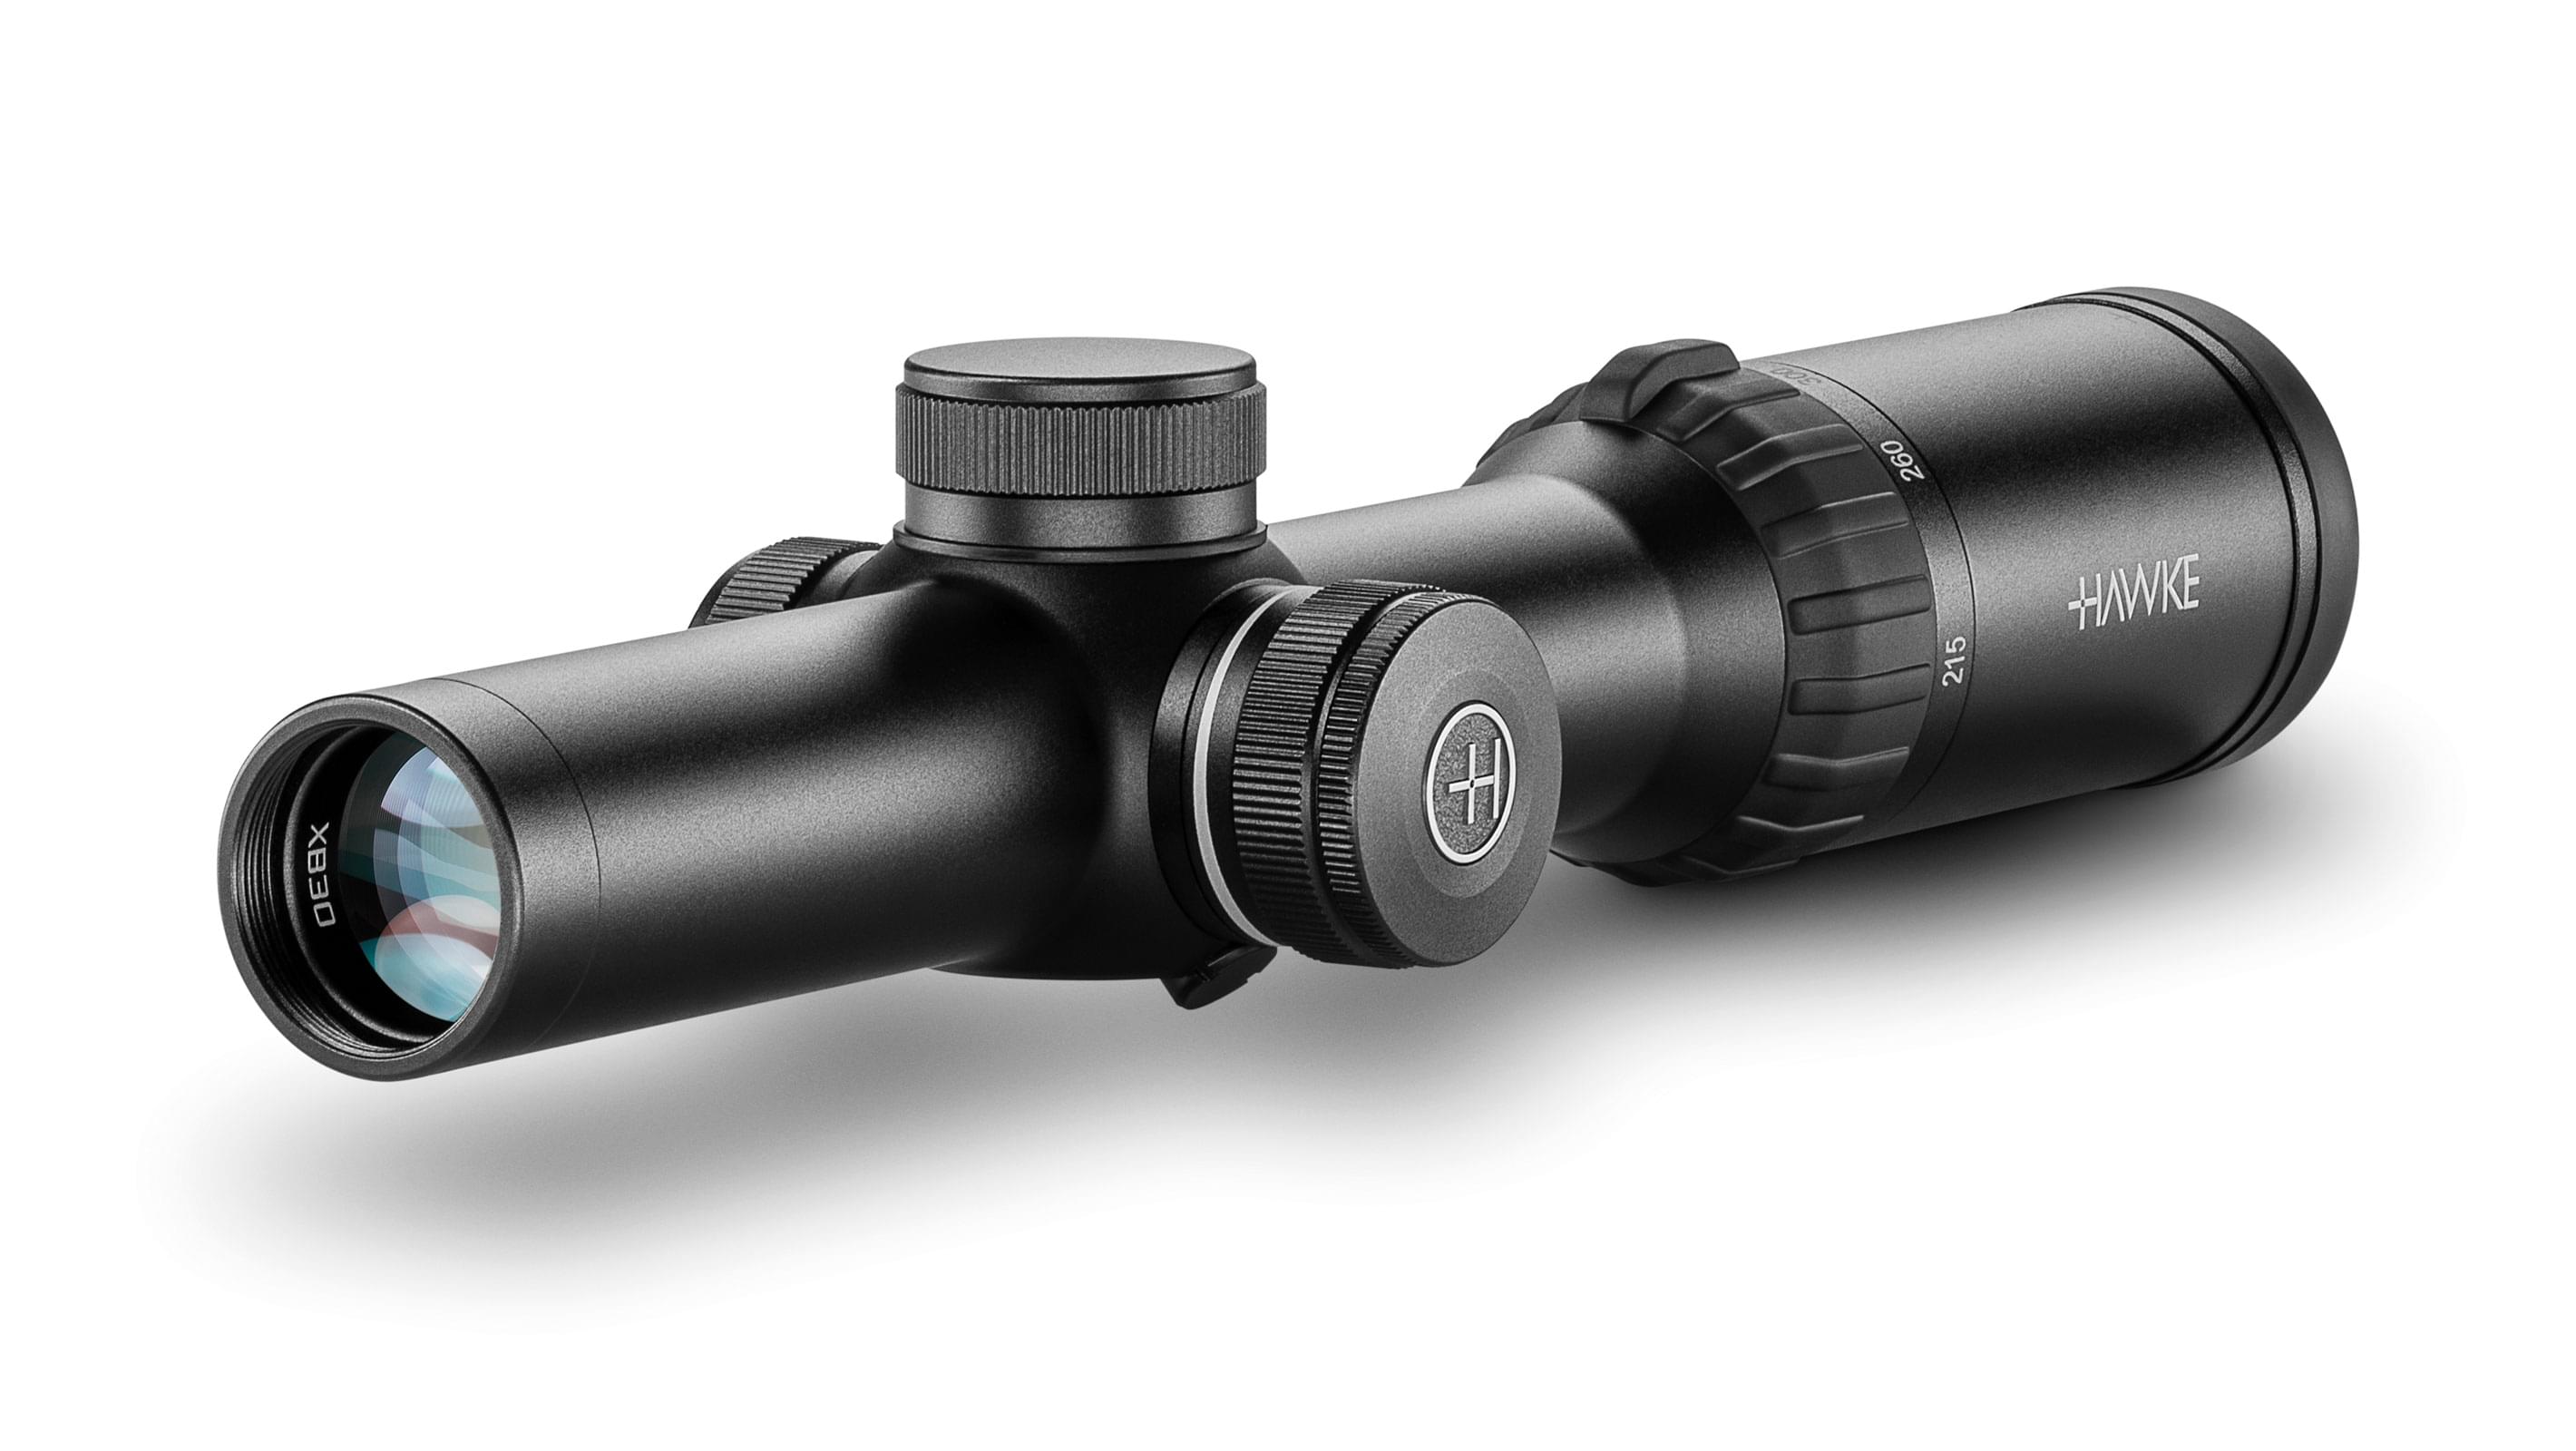 Objective End View Of The Hawke XB30 Pro 1-5x24 SR Scope